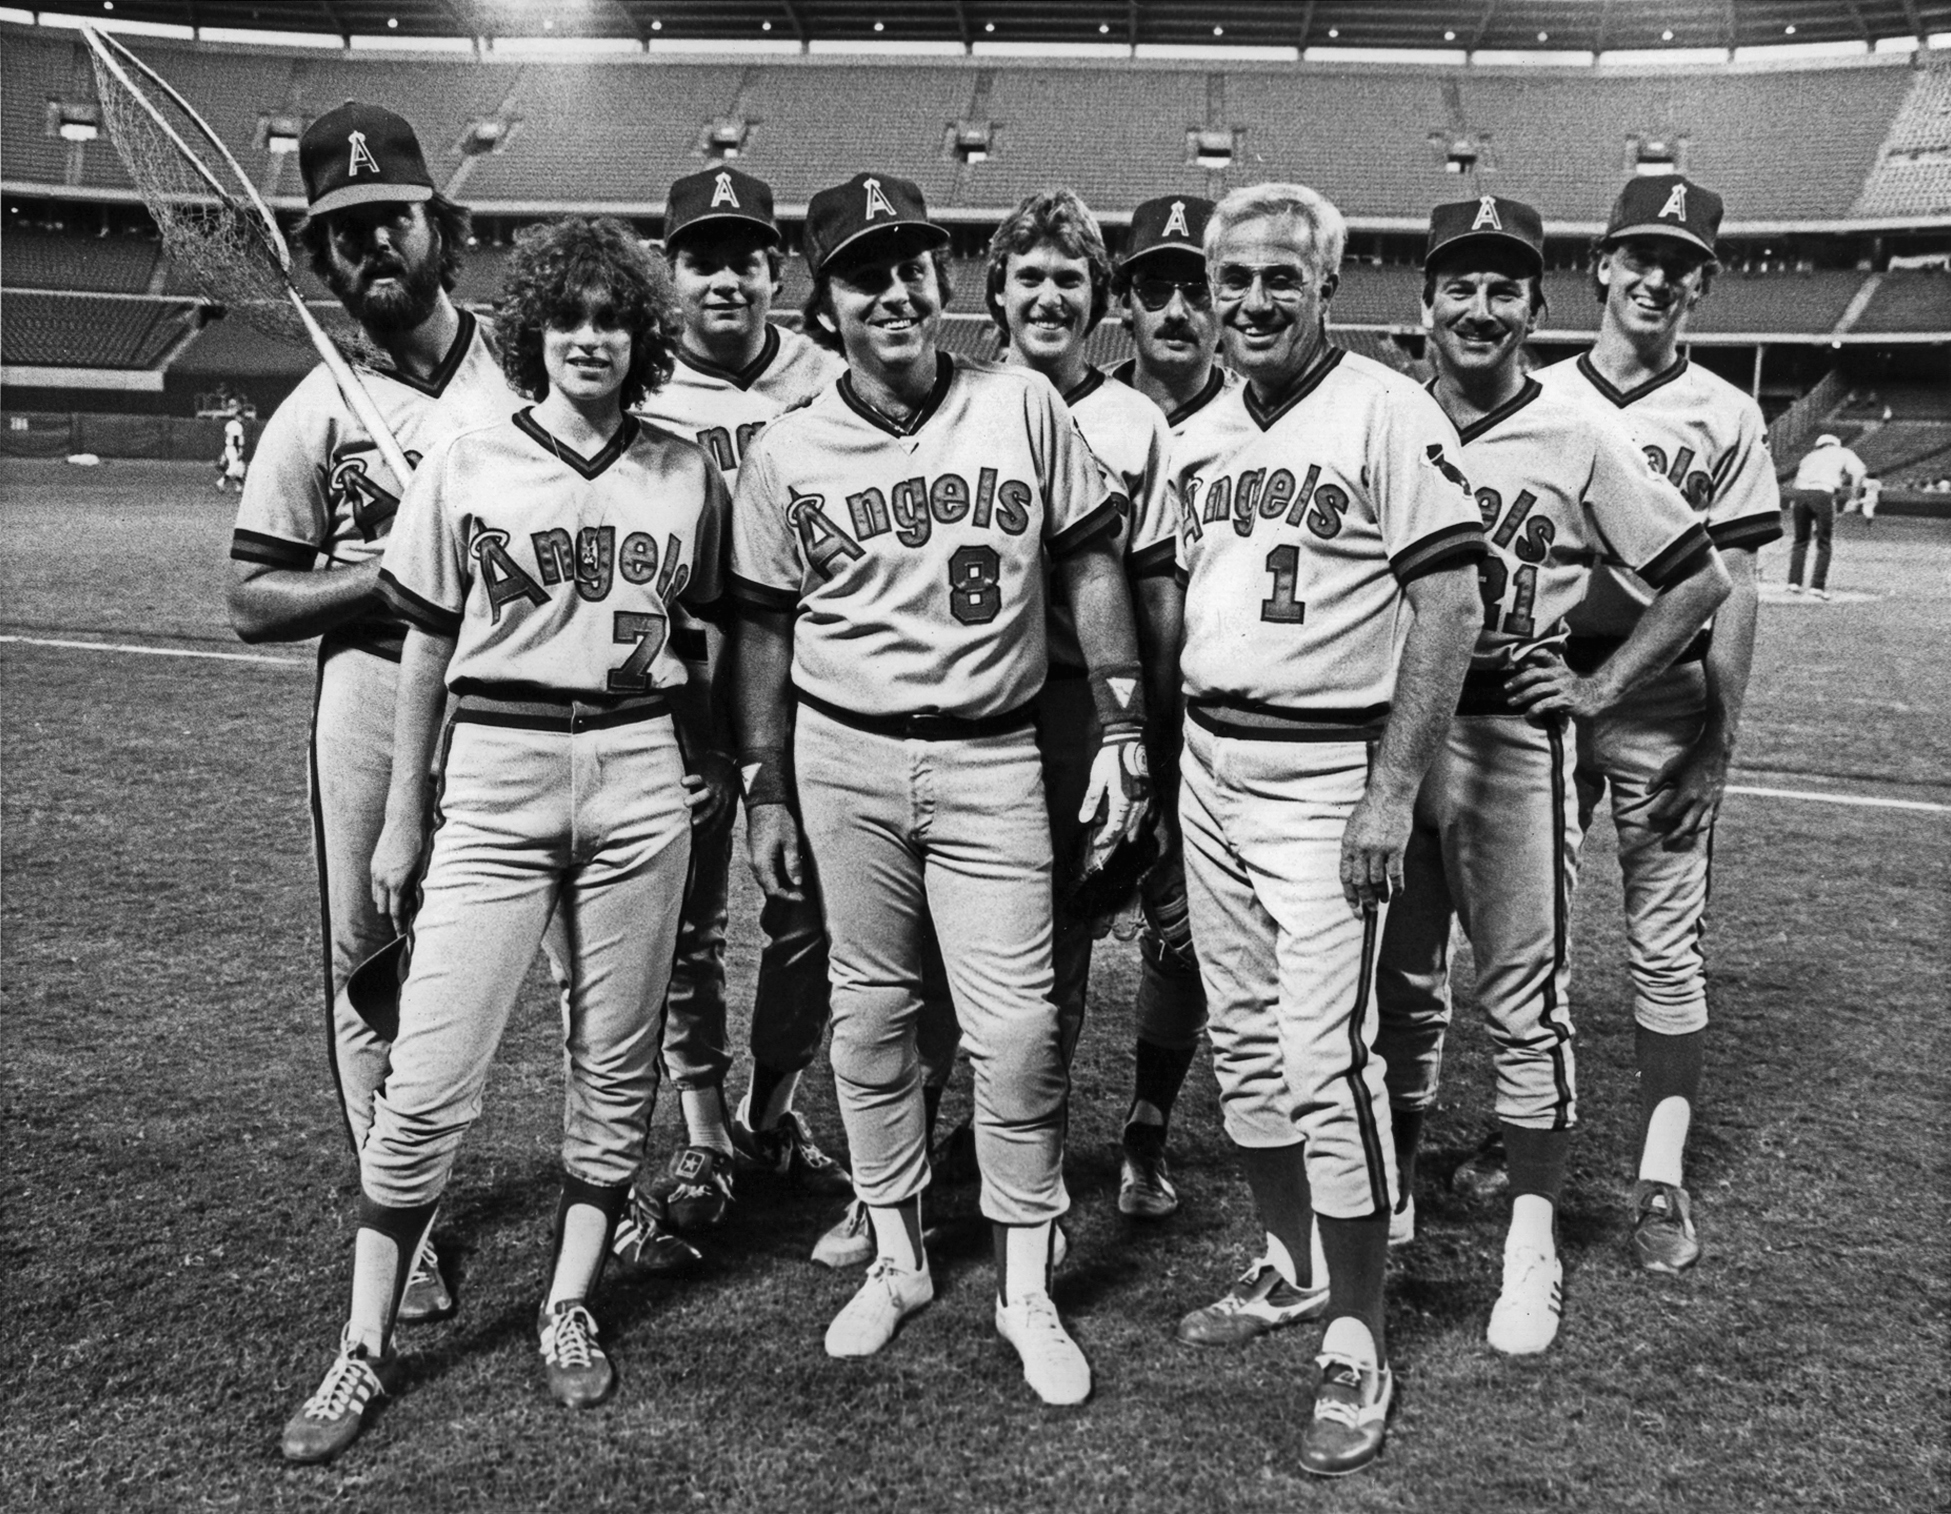 Lisa Saxon and the press corps covering the (then) California Angels suit up in 1983 for an exhibition game vs. the Happy Days cast. Lisa hit a single off The Fonz. Photo: V.J. Lovero